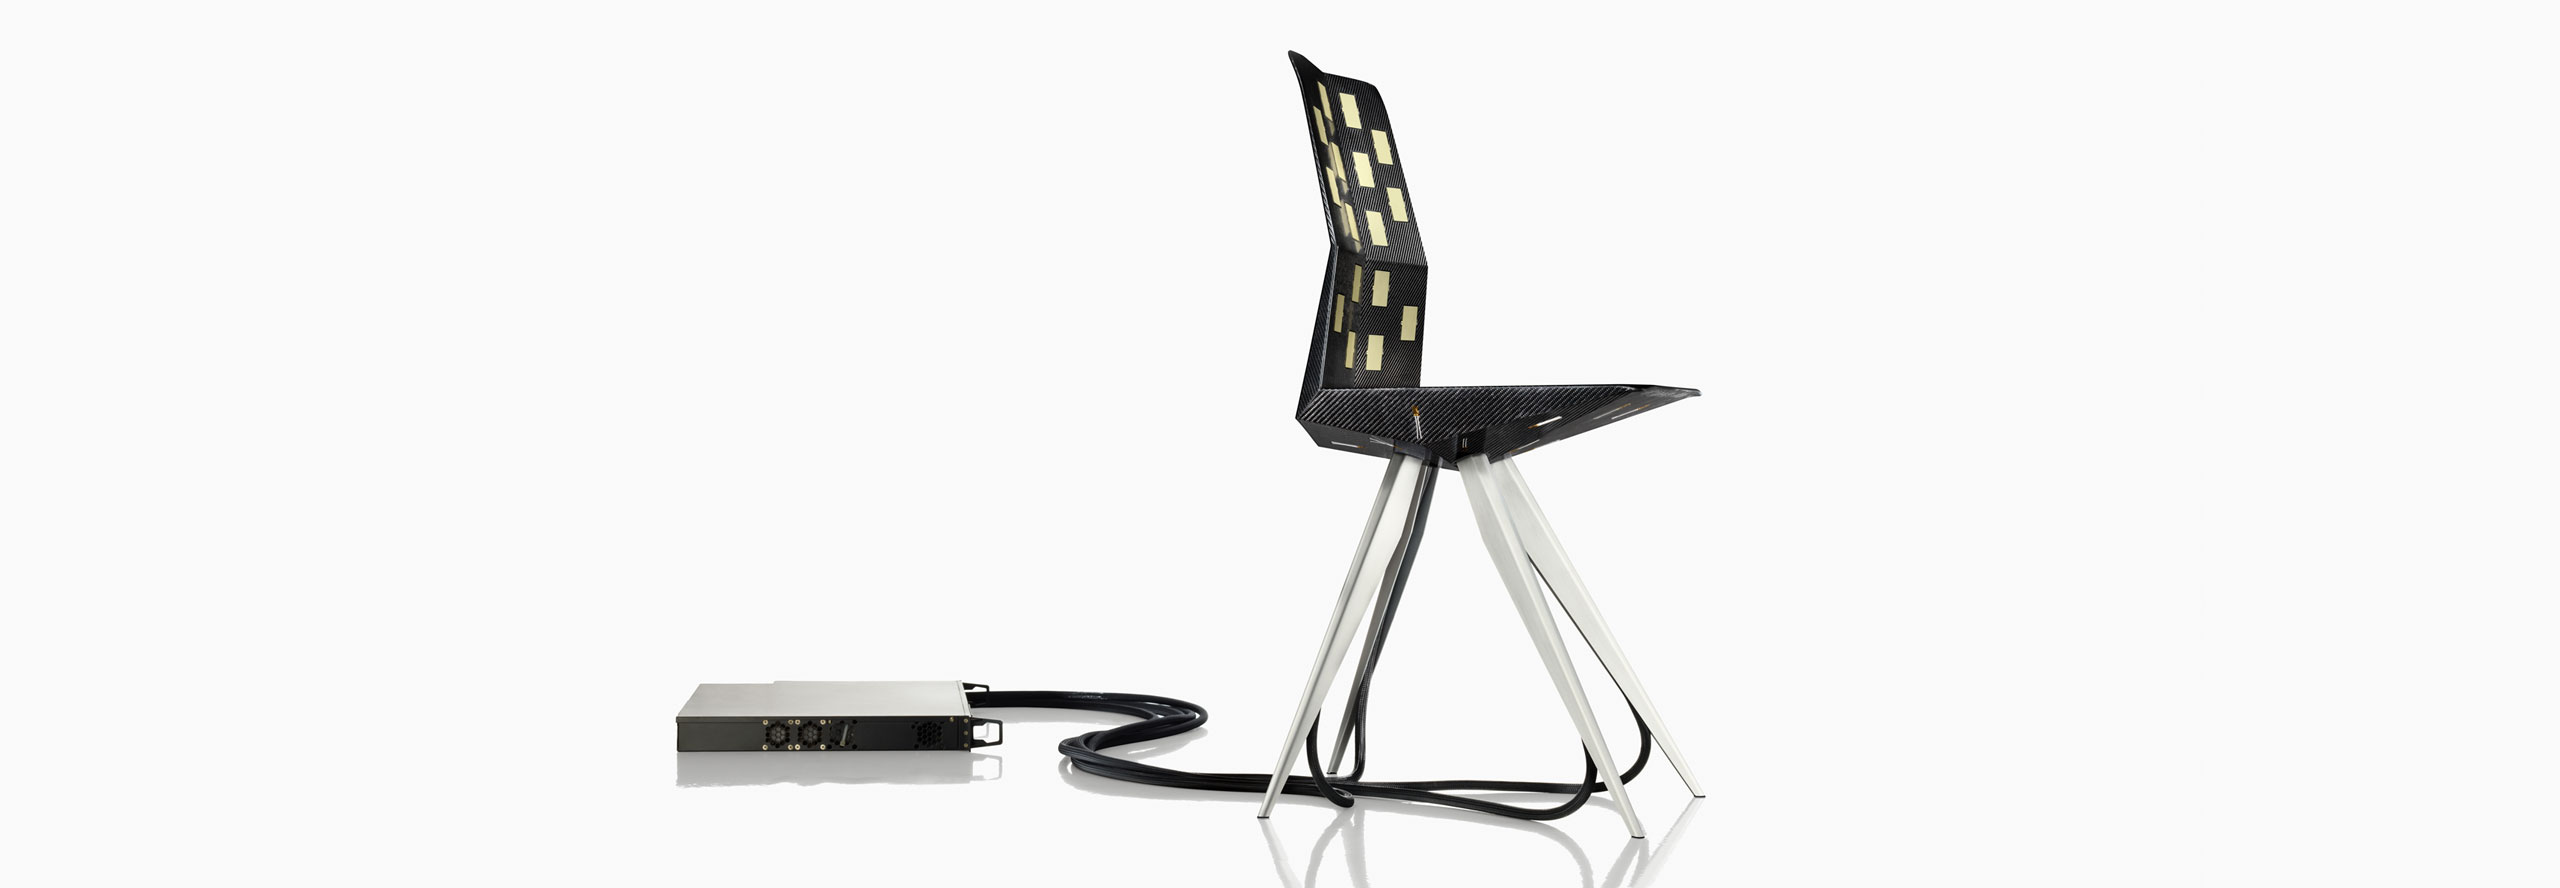 R18 Ultra chair from German based company